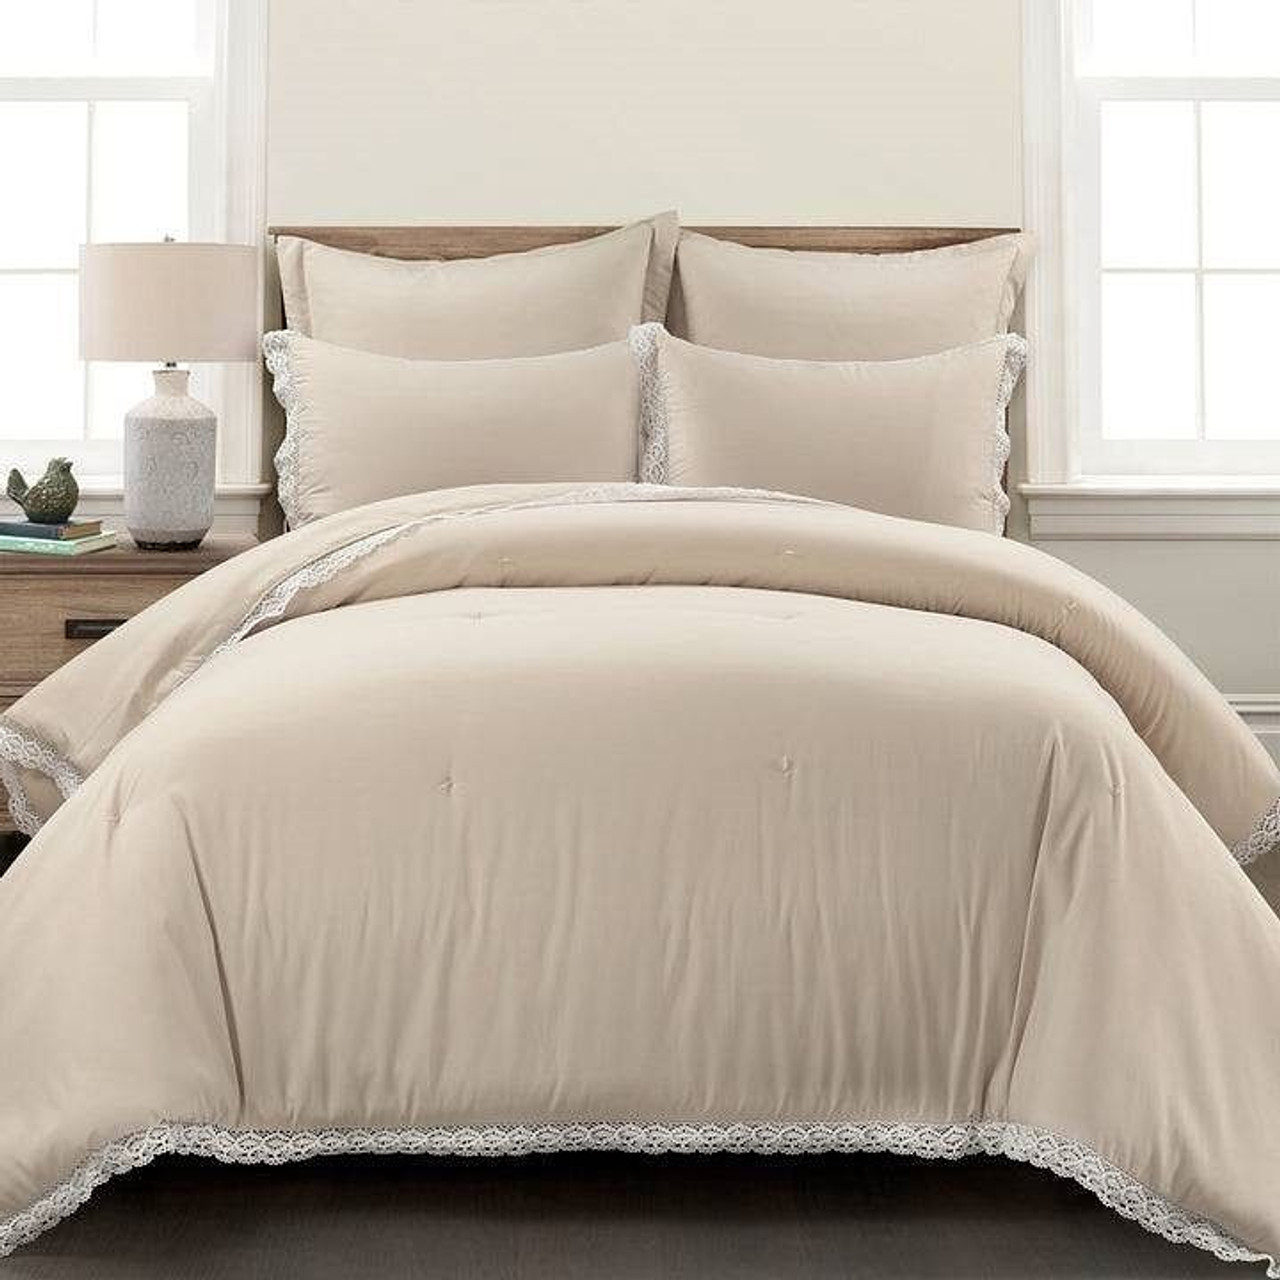 Full/Queen French Country Beige 5-Piece Lightweight Comforter Set w/ Lace Trim